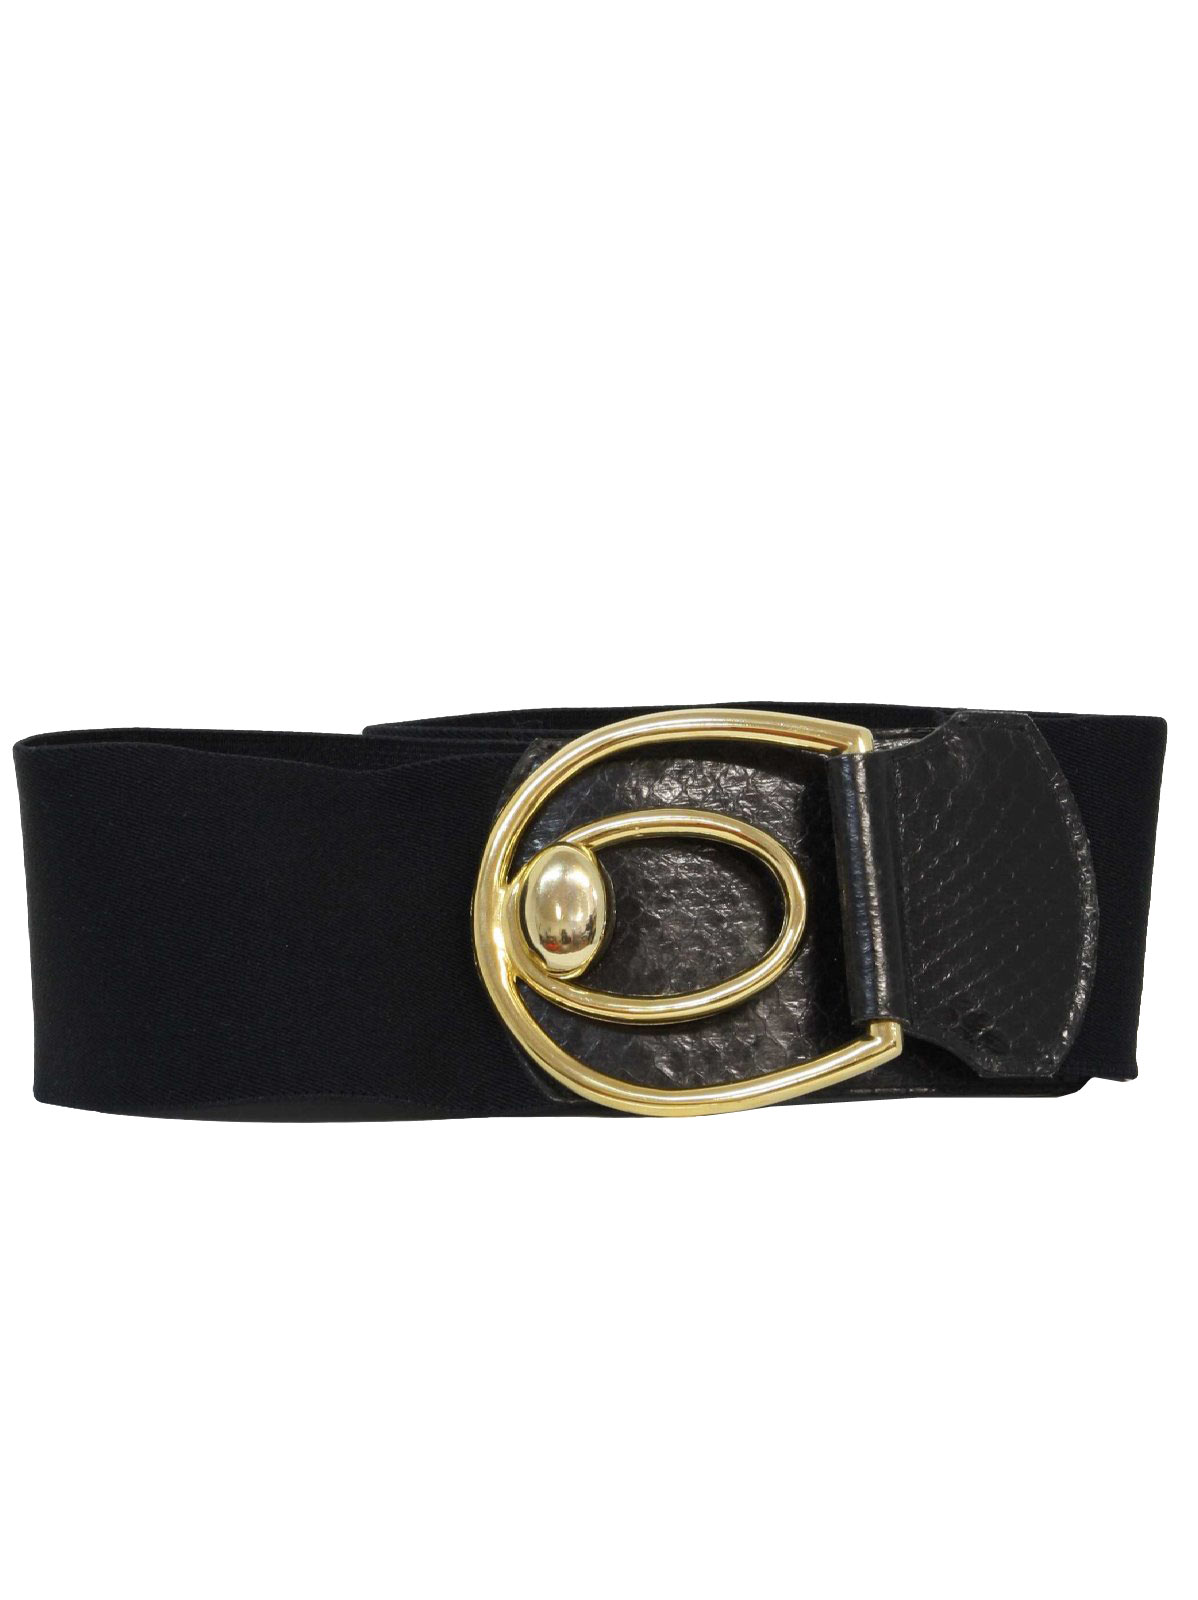 Retro 1980s Belt: 80s -Leather Shop- Womens black elastic back totally 80s thick belt with gold ...